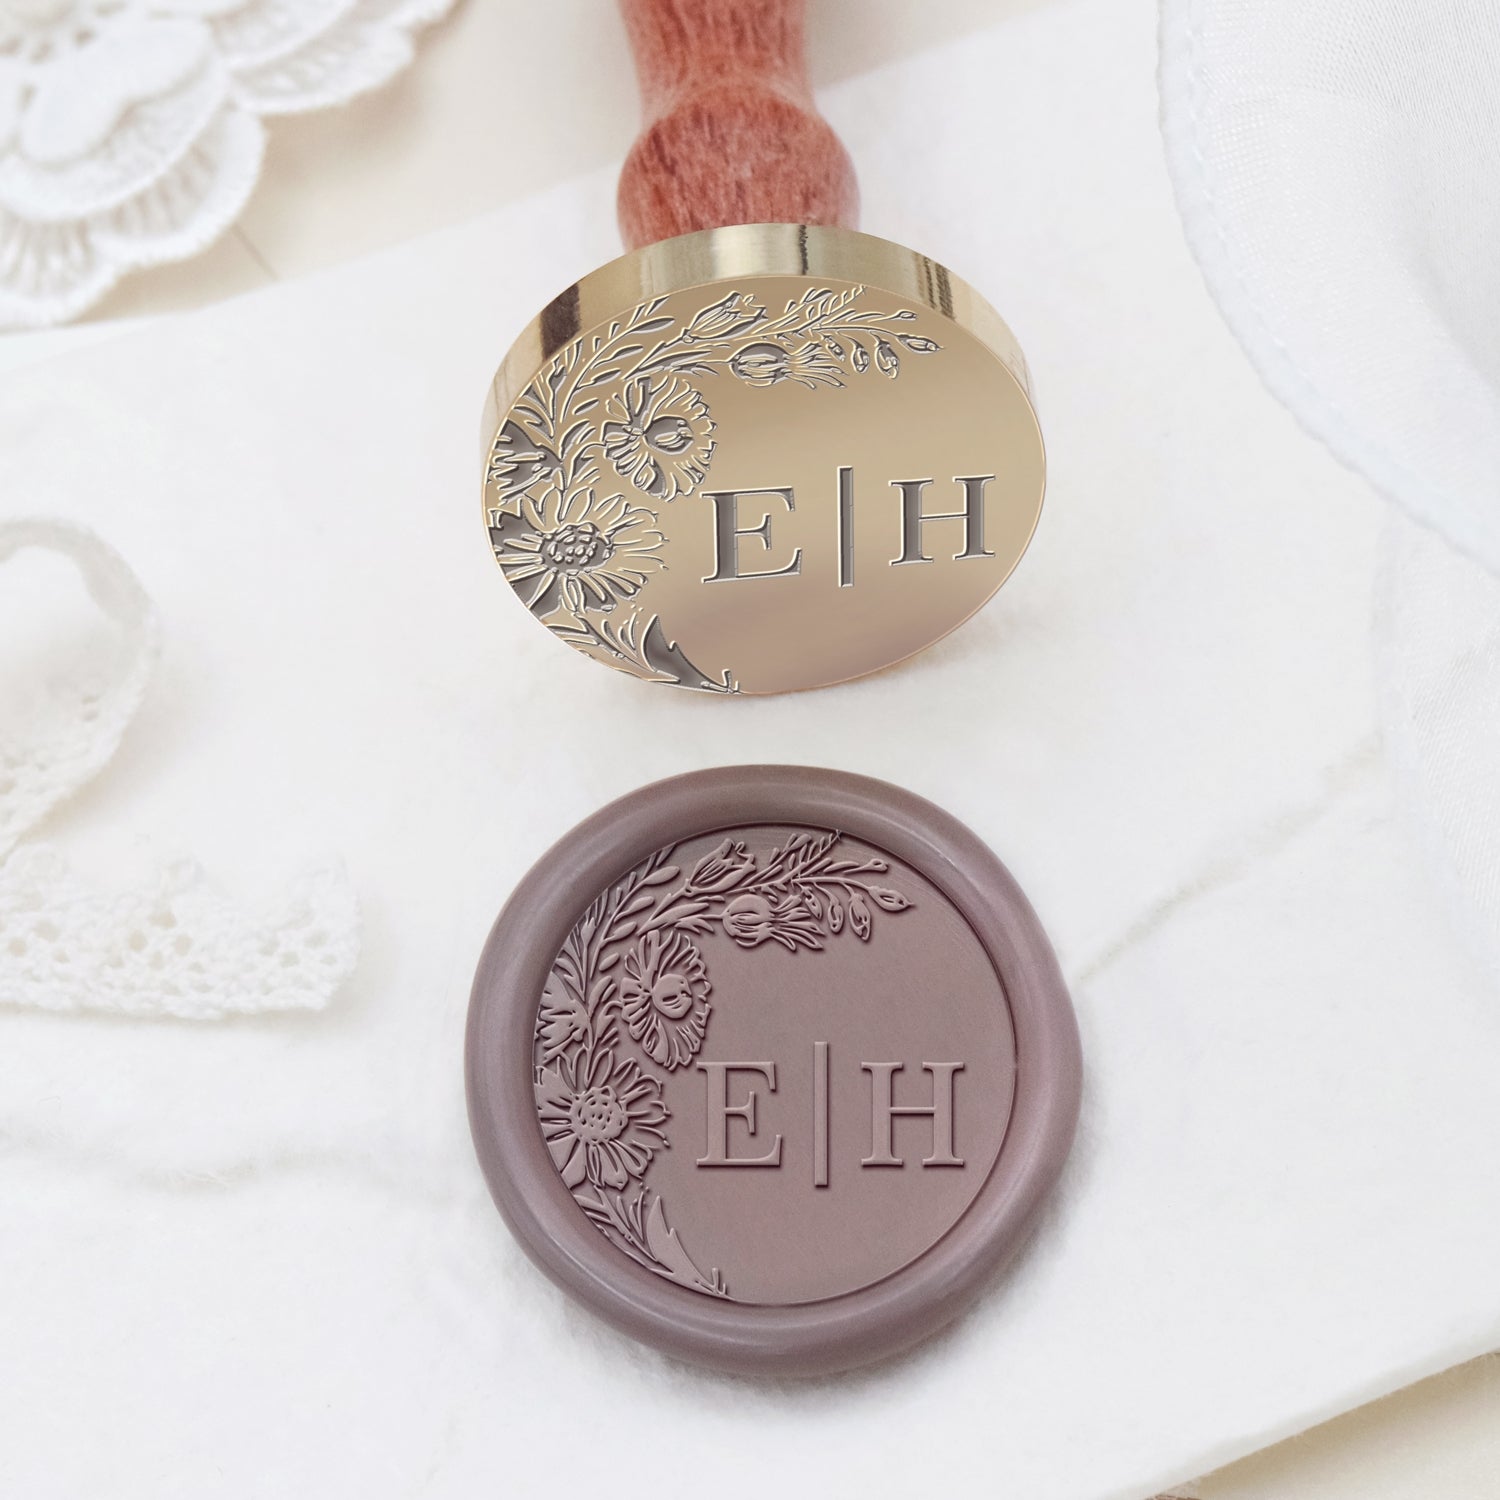 Double Happiness Wax Seal Stamp, Wax Seal Kit or Stamp Head 